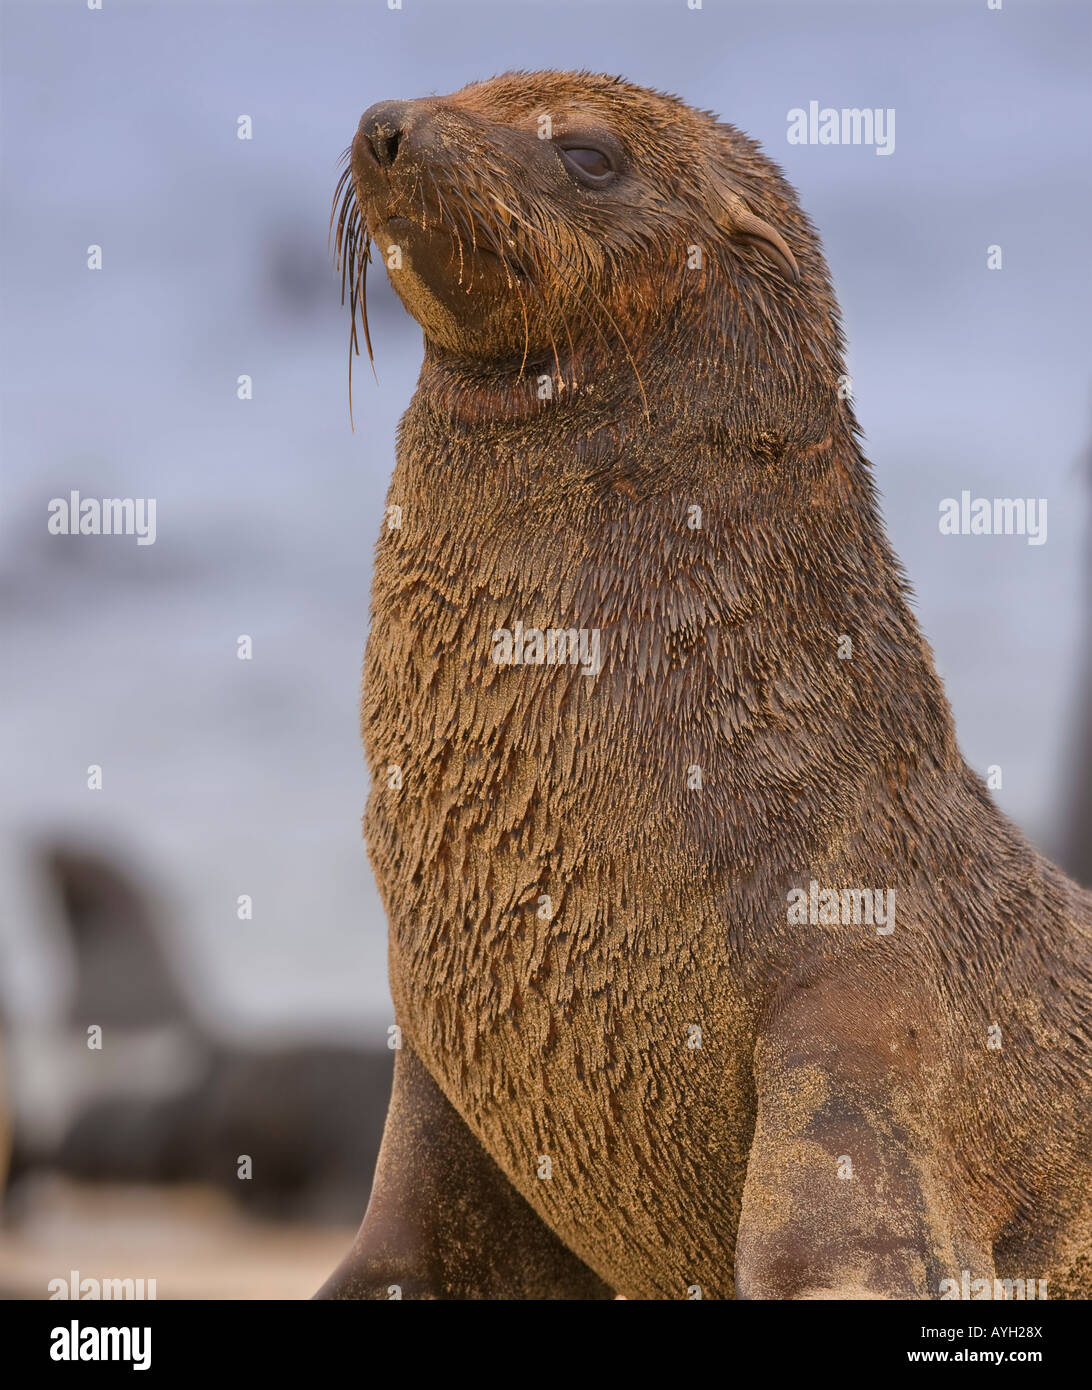 Close up of South African Fur Seal, Namibia, Africa Stock Photo